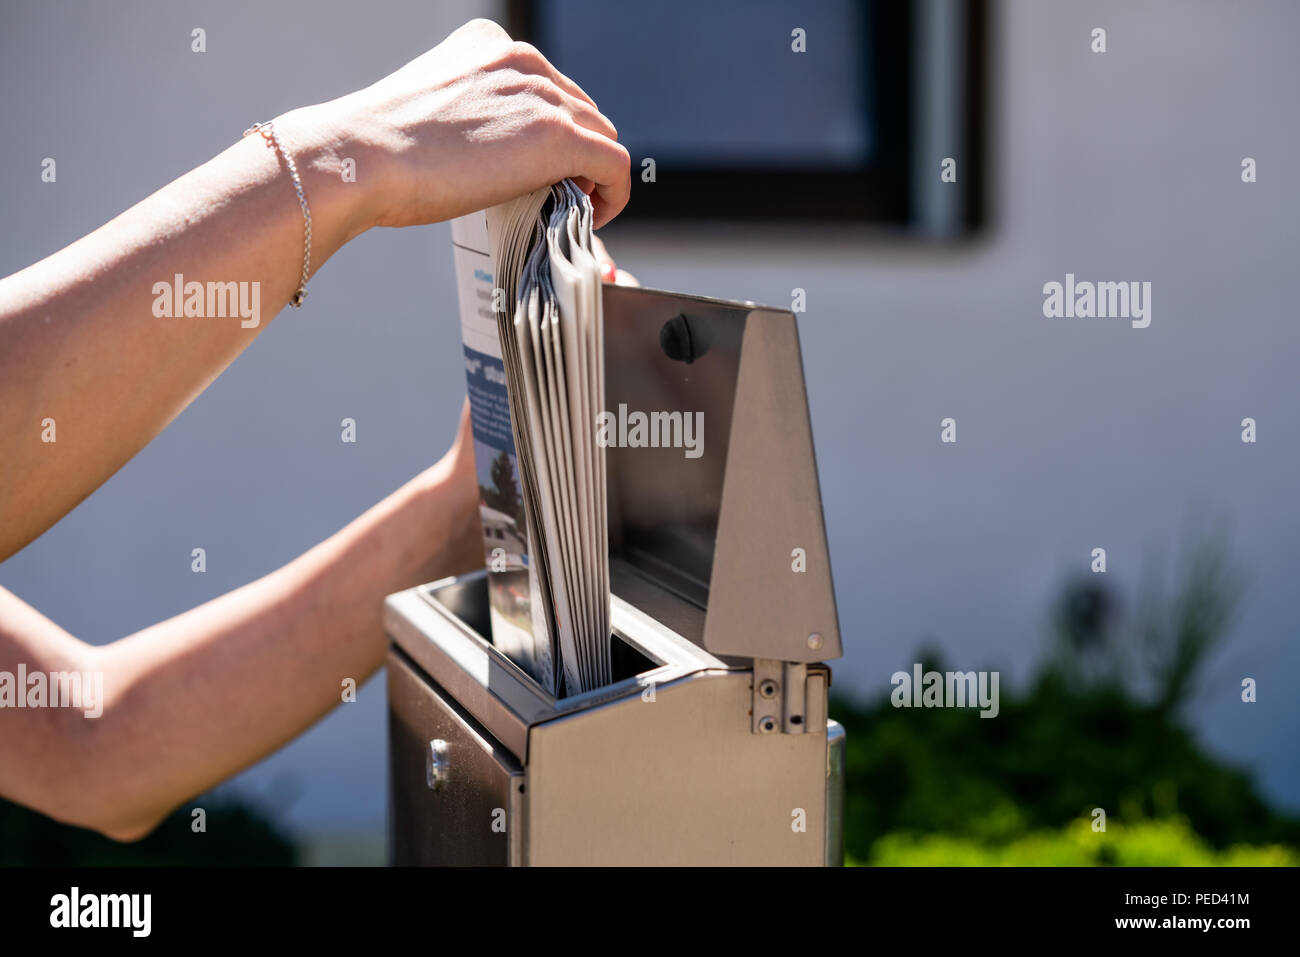 A woman takes a newspaper off a mailbox. Stock Photo